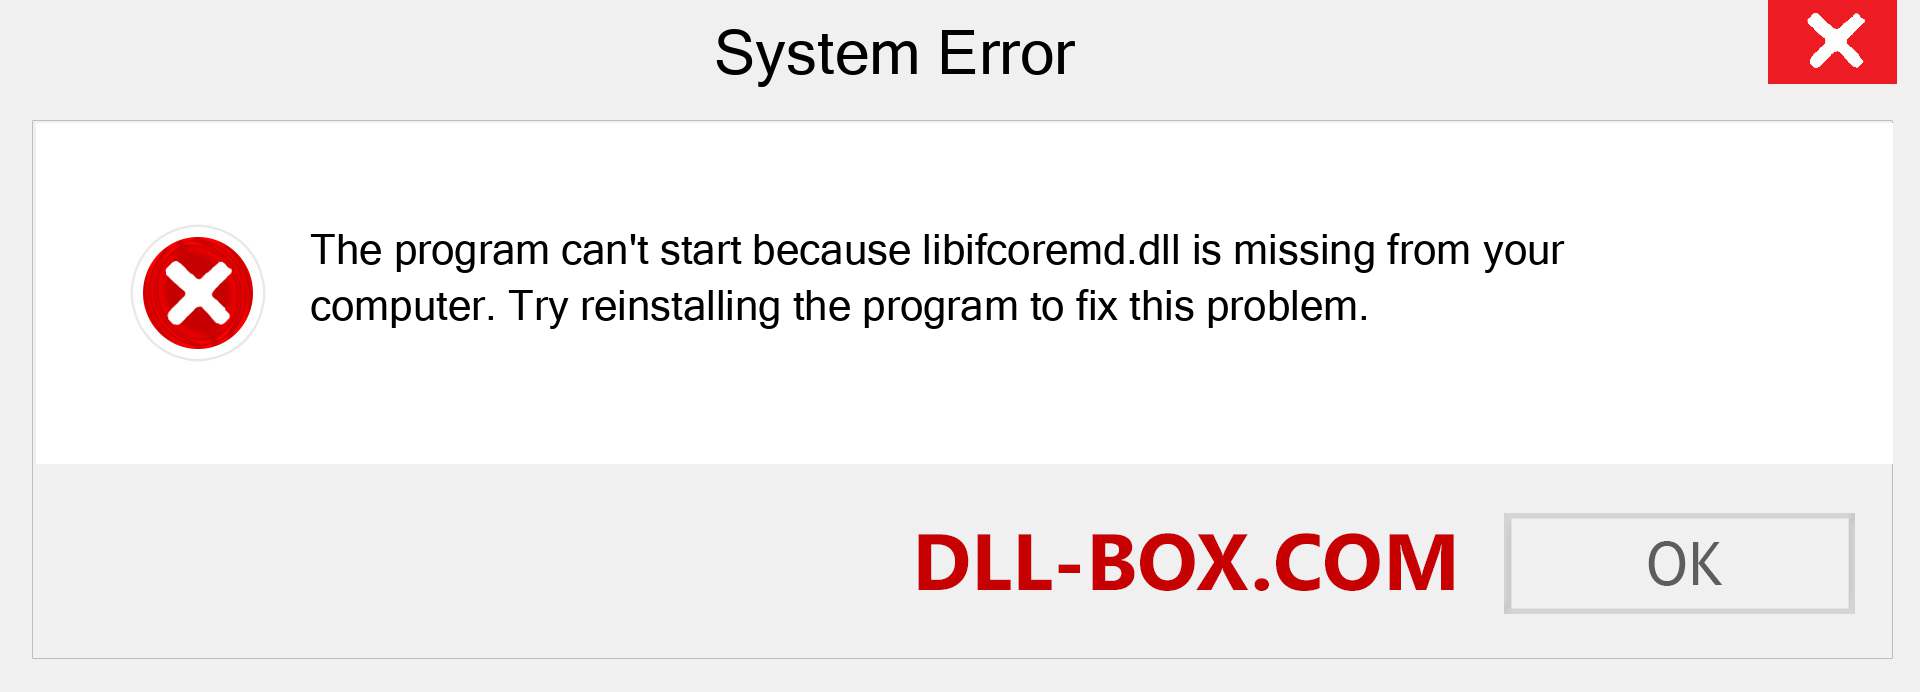  libifcoremd.dll file is missing?. Download for Windows 7, 8, 10 - Fix  libifcoremd dll Missing Error on Windows, photos, images